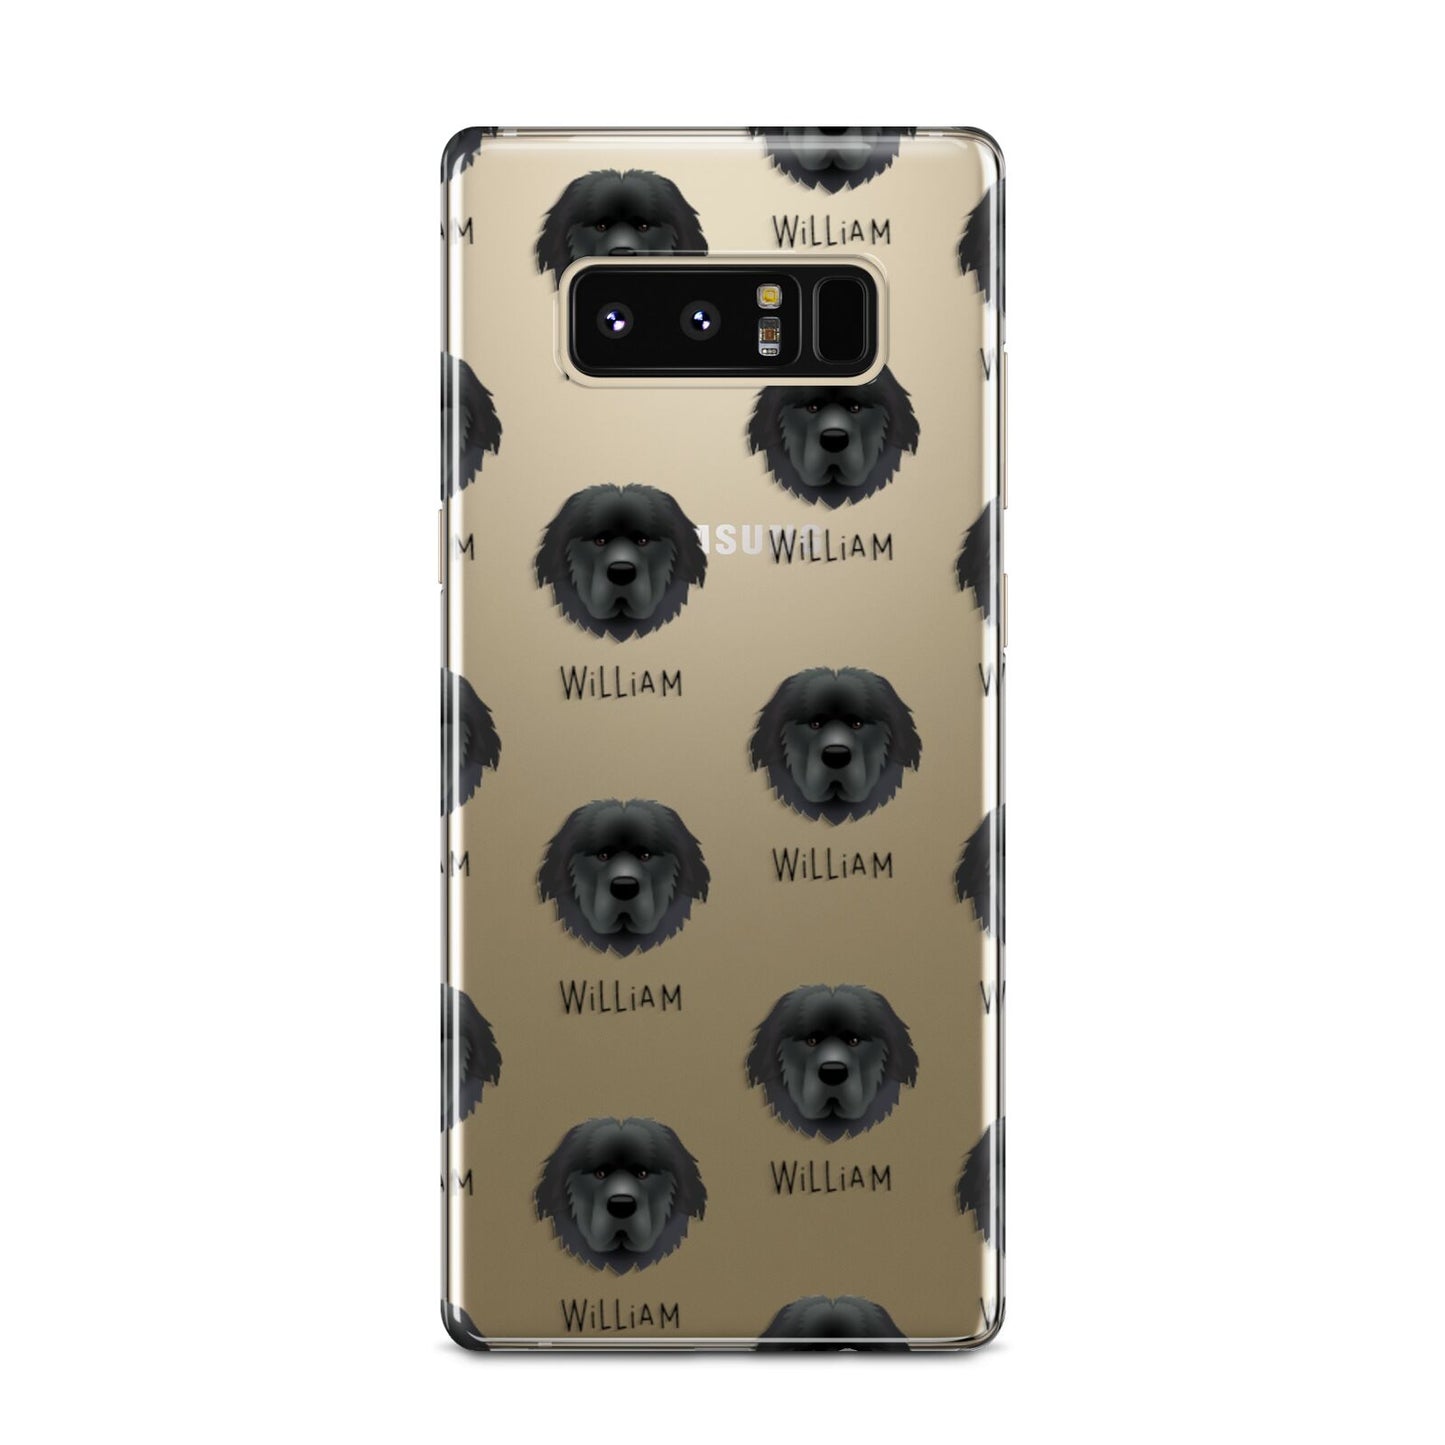 Newfoundland Icon with Name Samsung Galaxy Note 8 Case